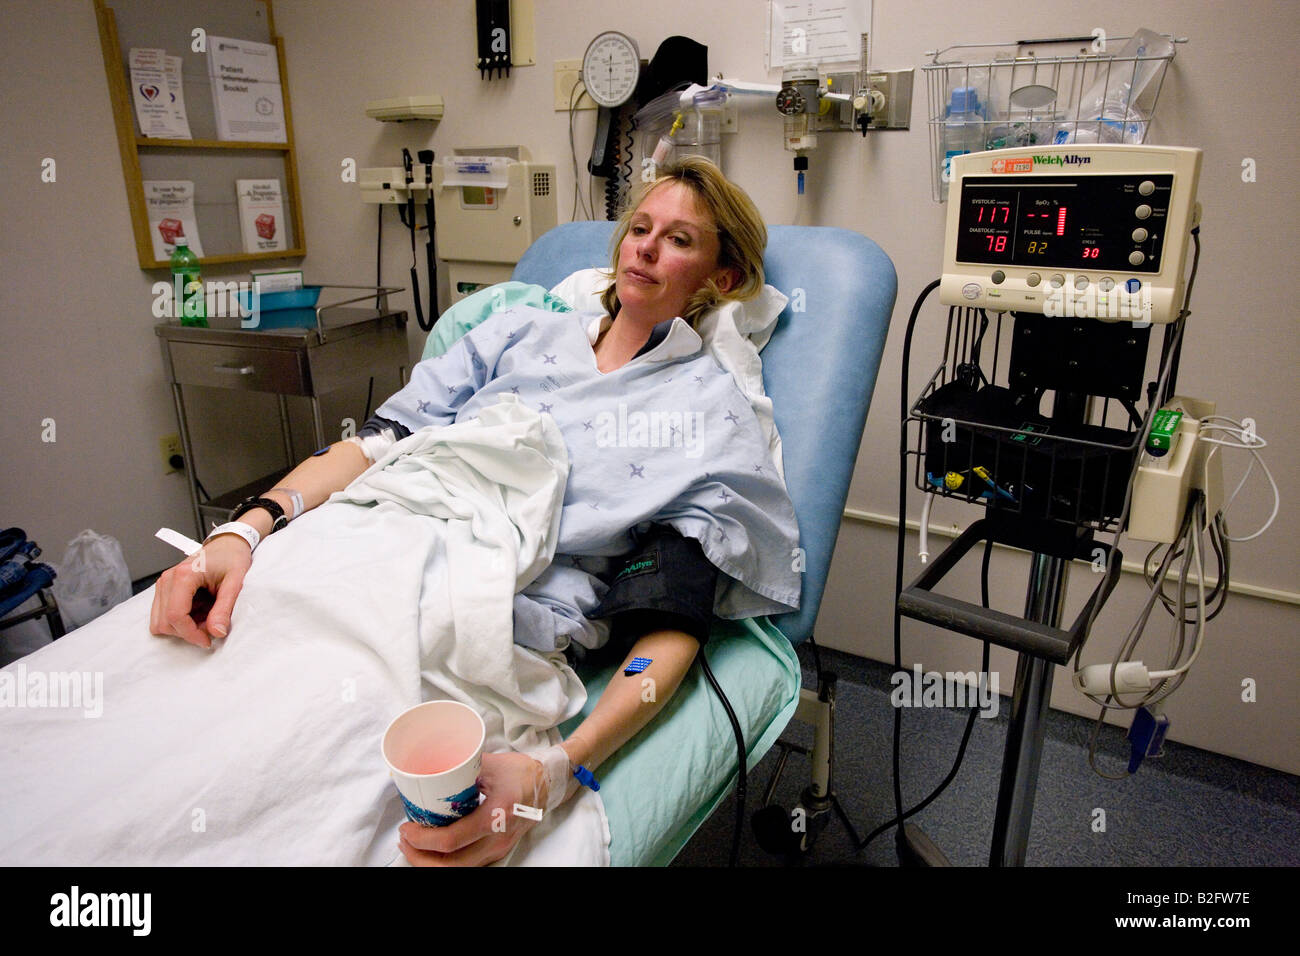 patient waiting in hospital emergency area for treatment Stock Photo